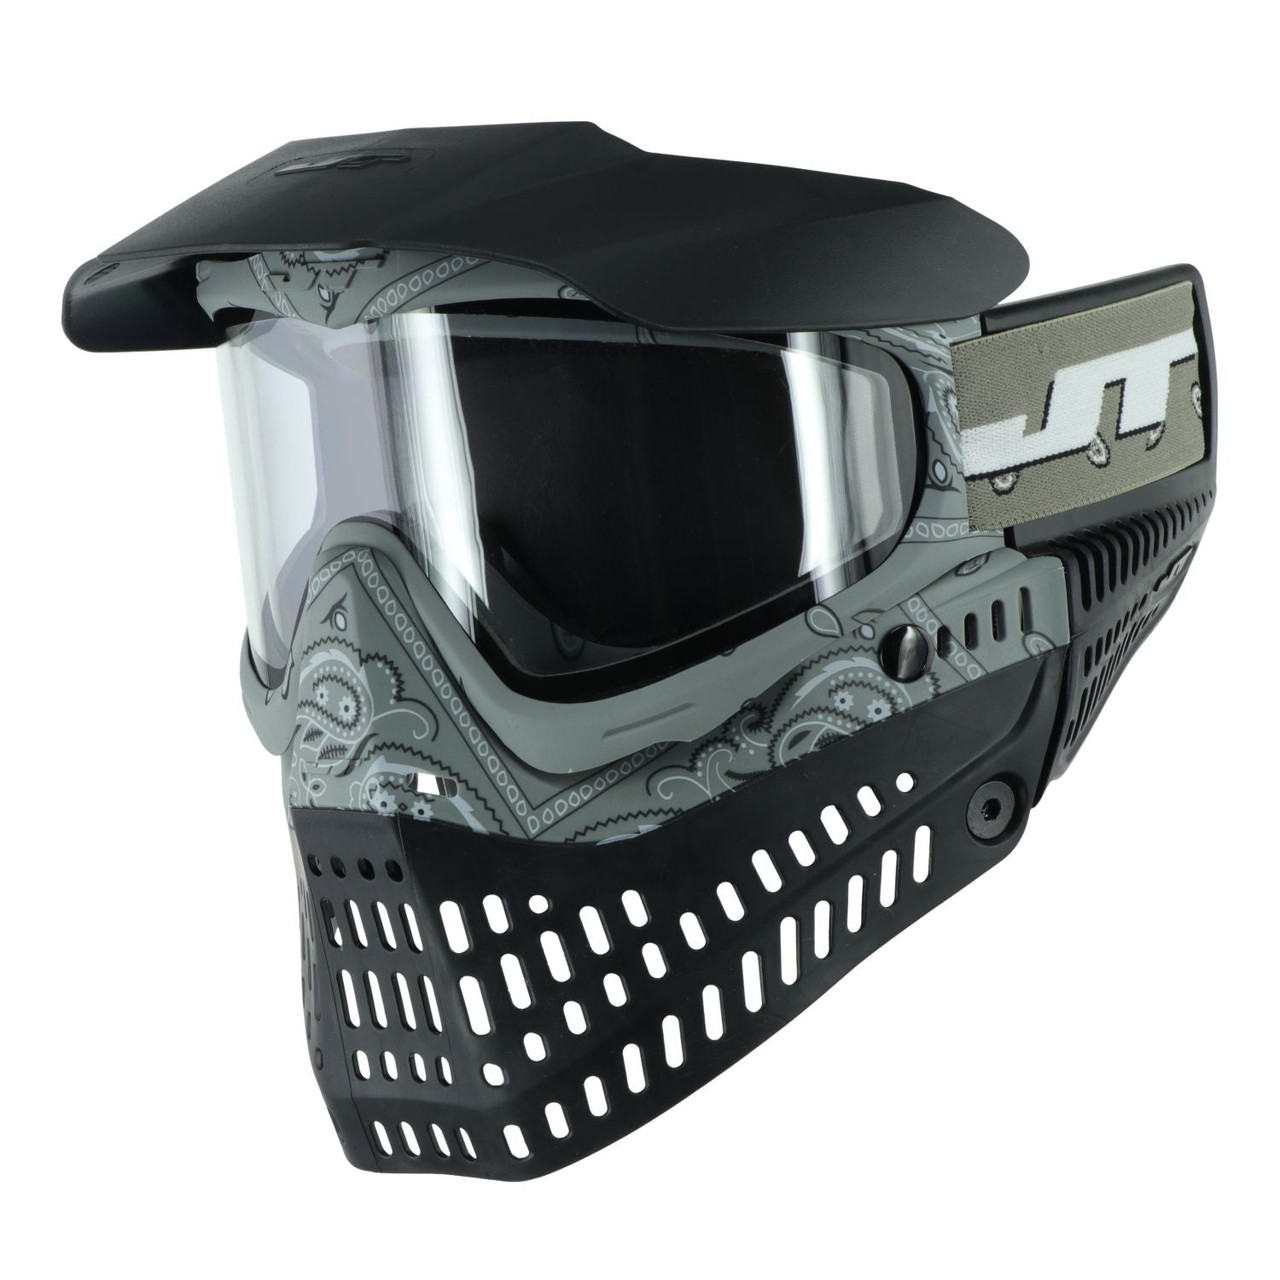 Scott Paintball Mask - Black - with cloth bag - Made in the USA